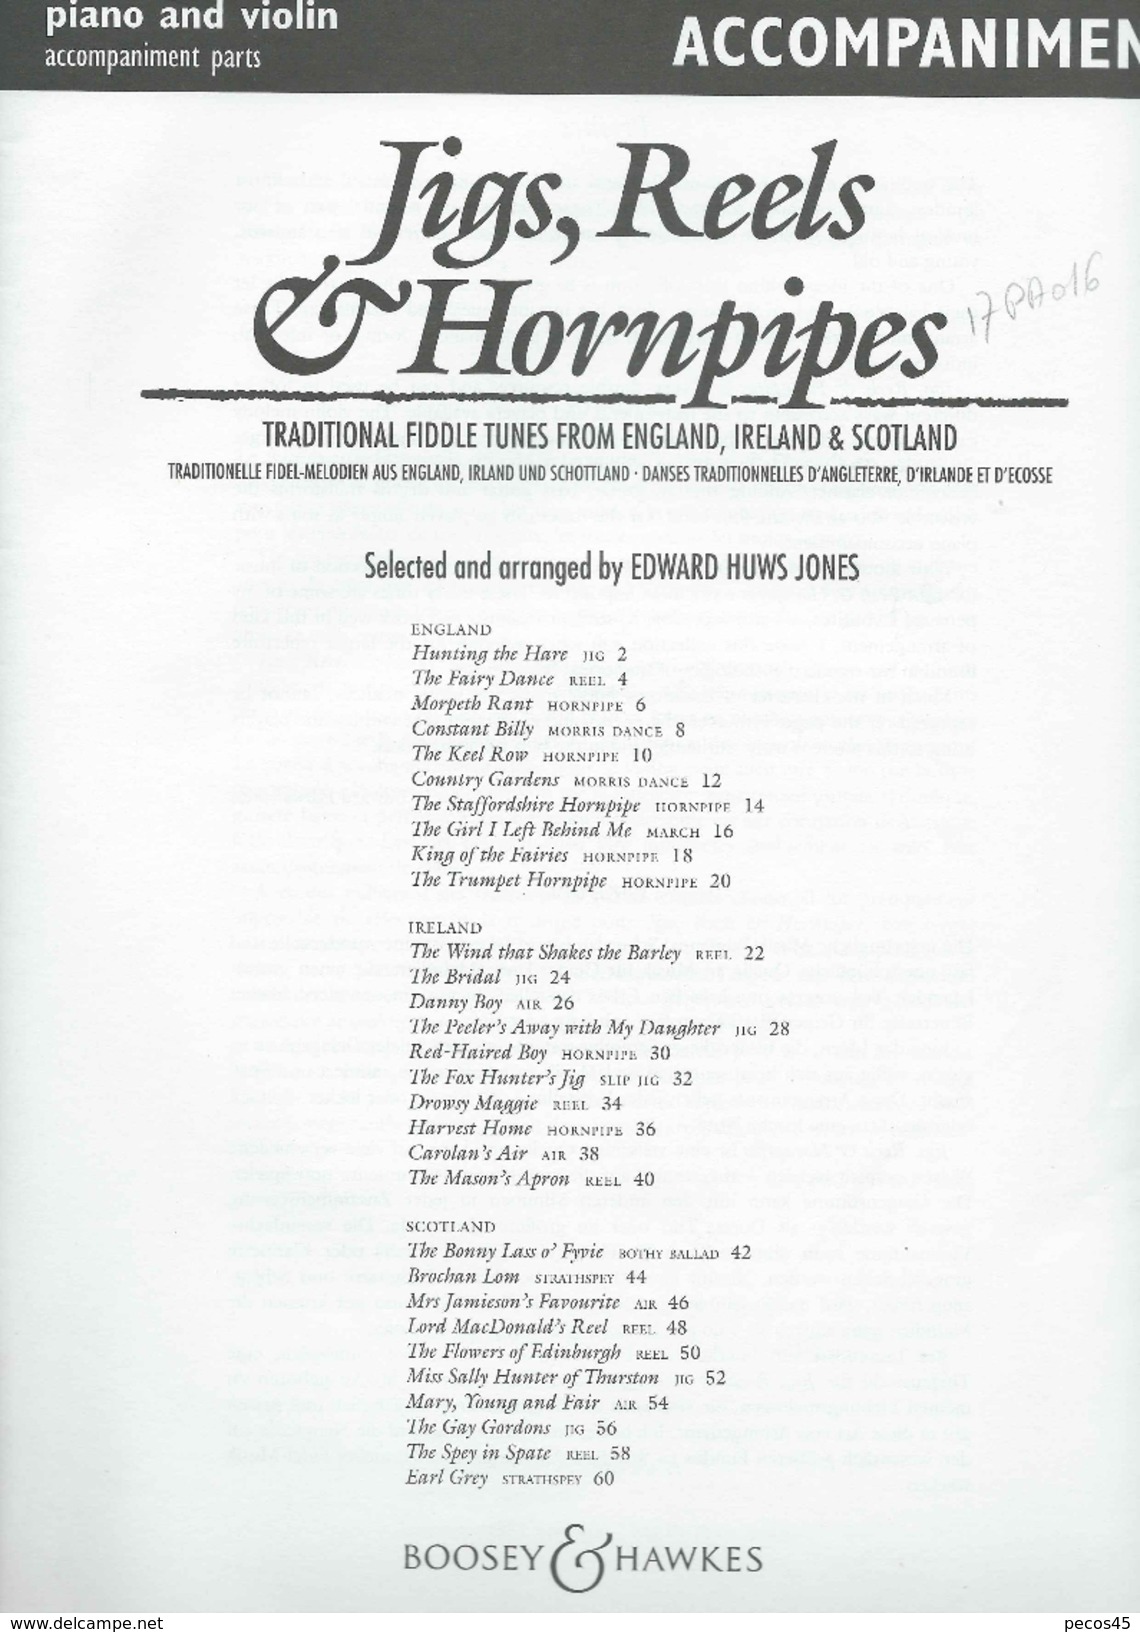 "JIGS, REELS & HORNPIPES" - Editions Boosey & Hawkes / London - 1992. - Volksmusik